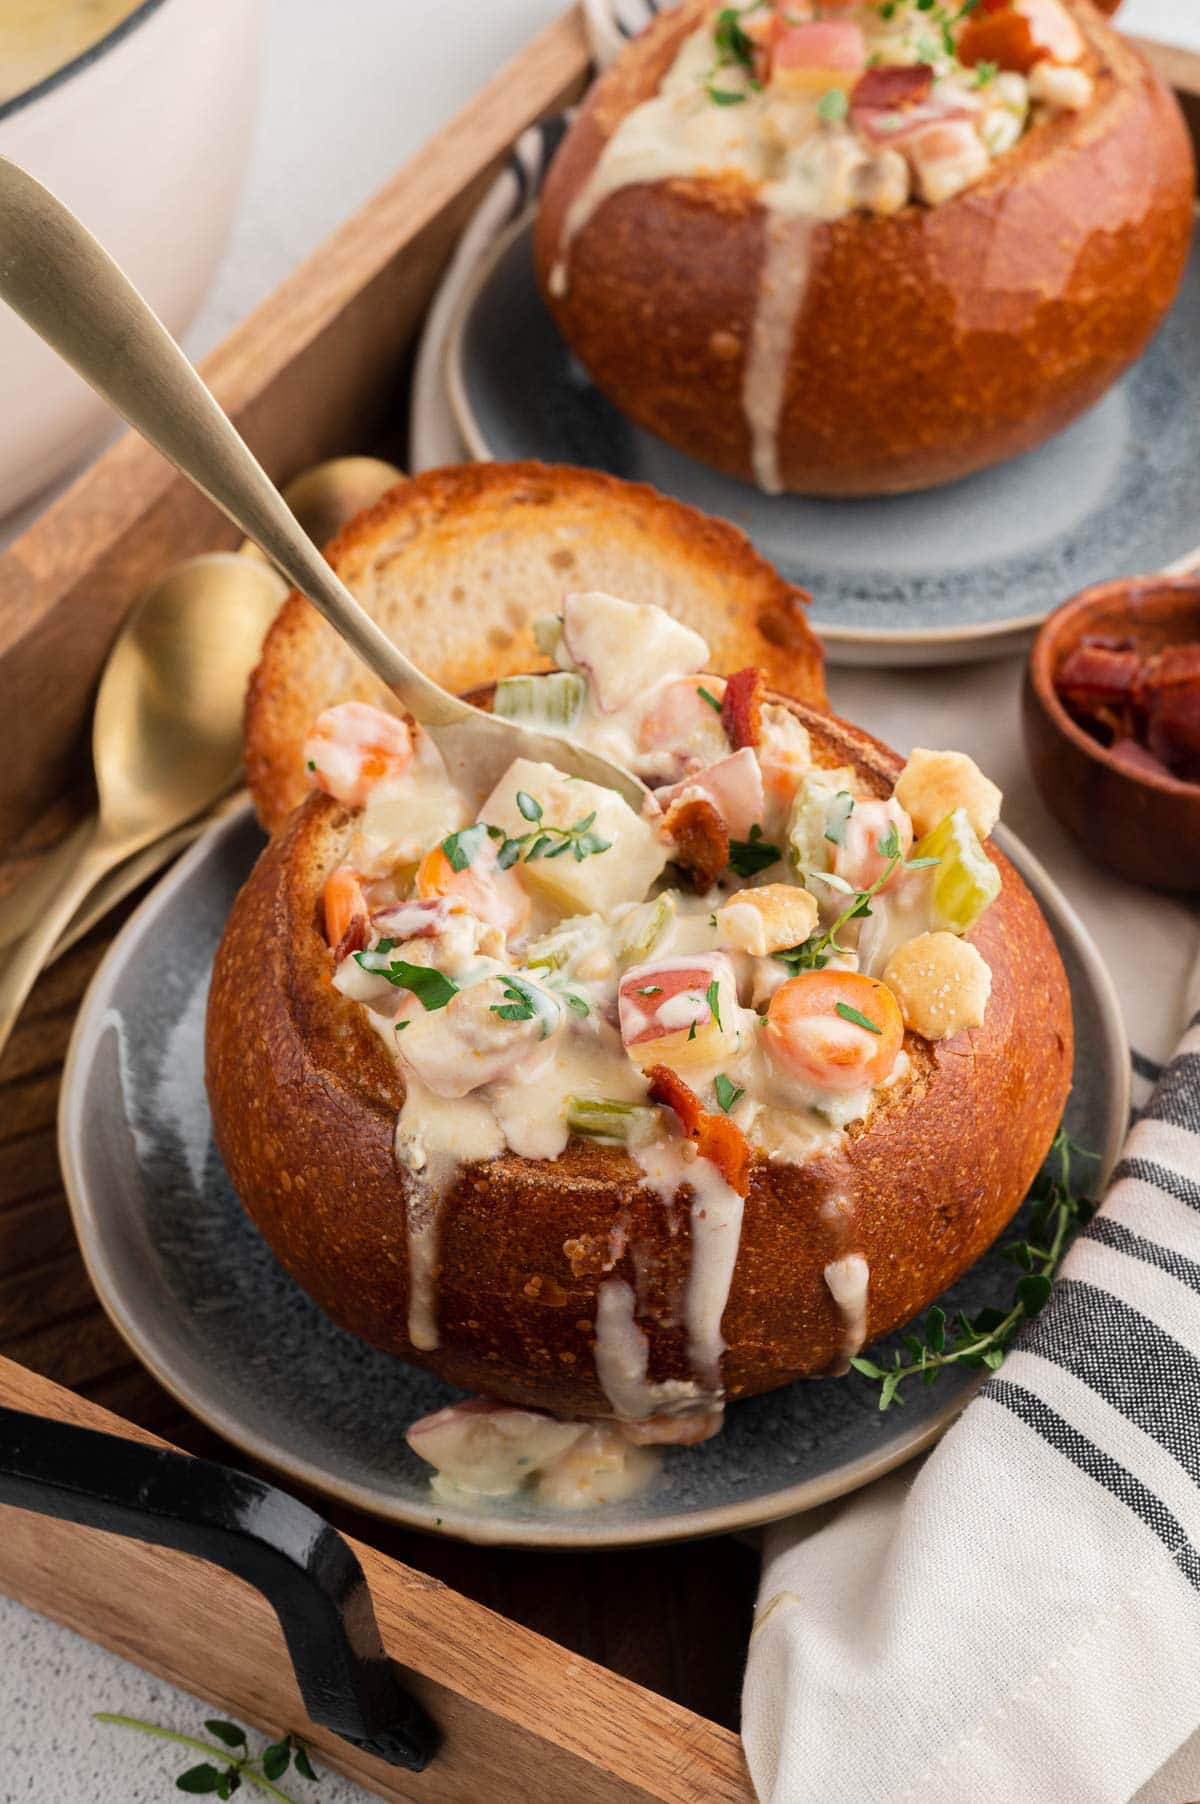 Clam chowder in a bread bowl with clam chowder dripping over the sides of the bread, with a spoon.